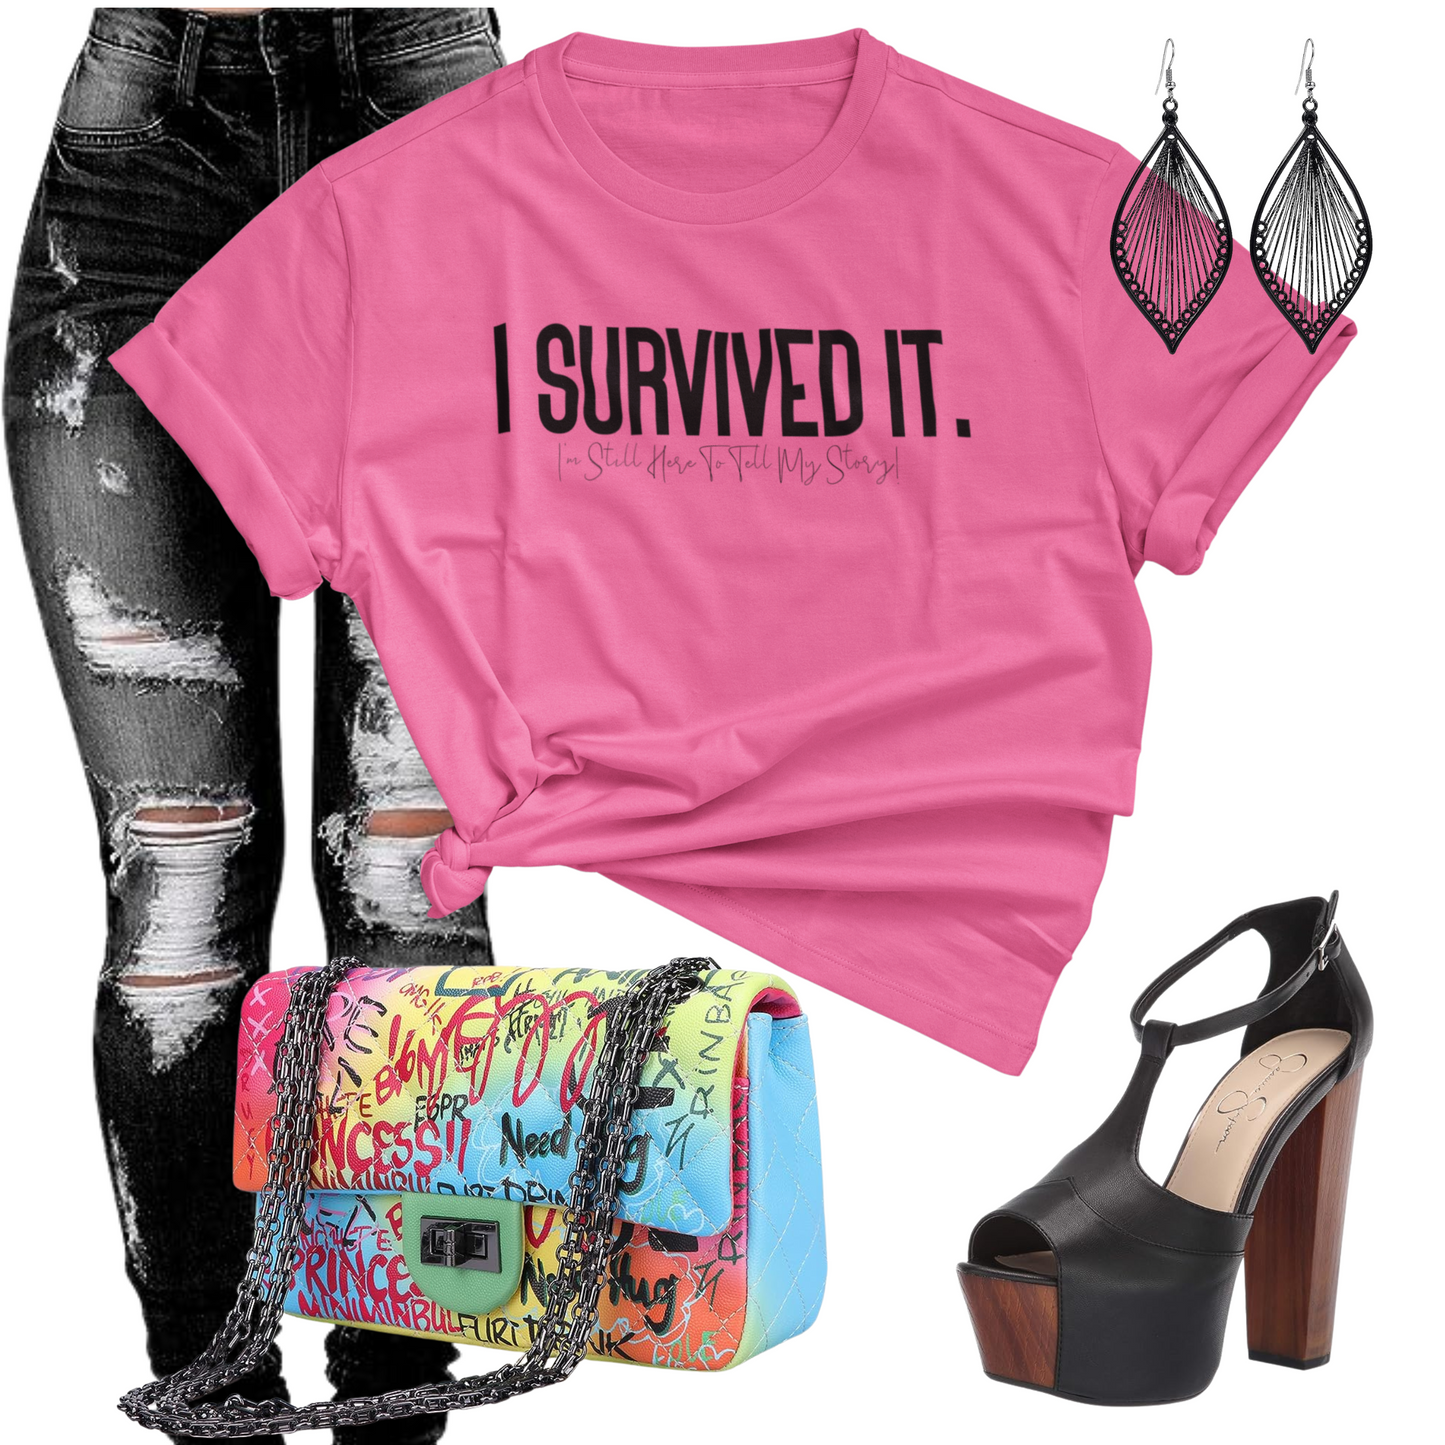 Buy our I Survived It Christian Statement Unisex t-shirt. This faith based clothing is breast cancer pink, soft, and comfortable. You can wear it everyday. This Christian statement t-shirt will definitely spark up a conversation about your faith. Be prepared to tell your story.